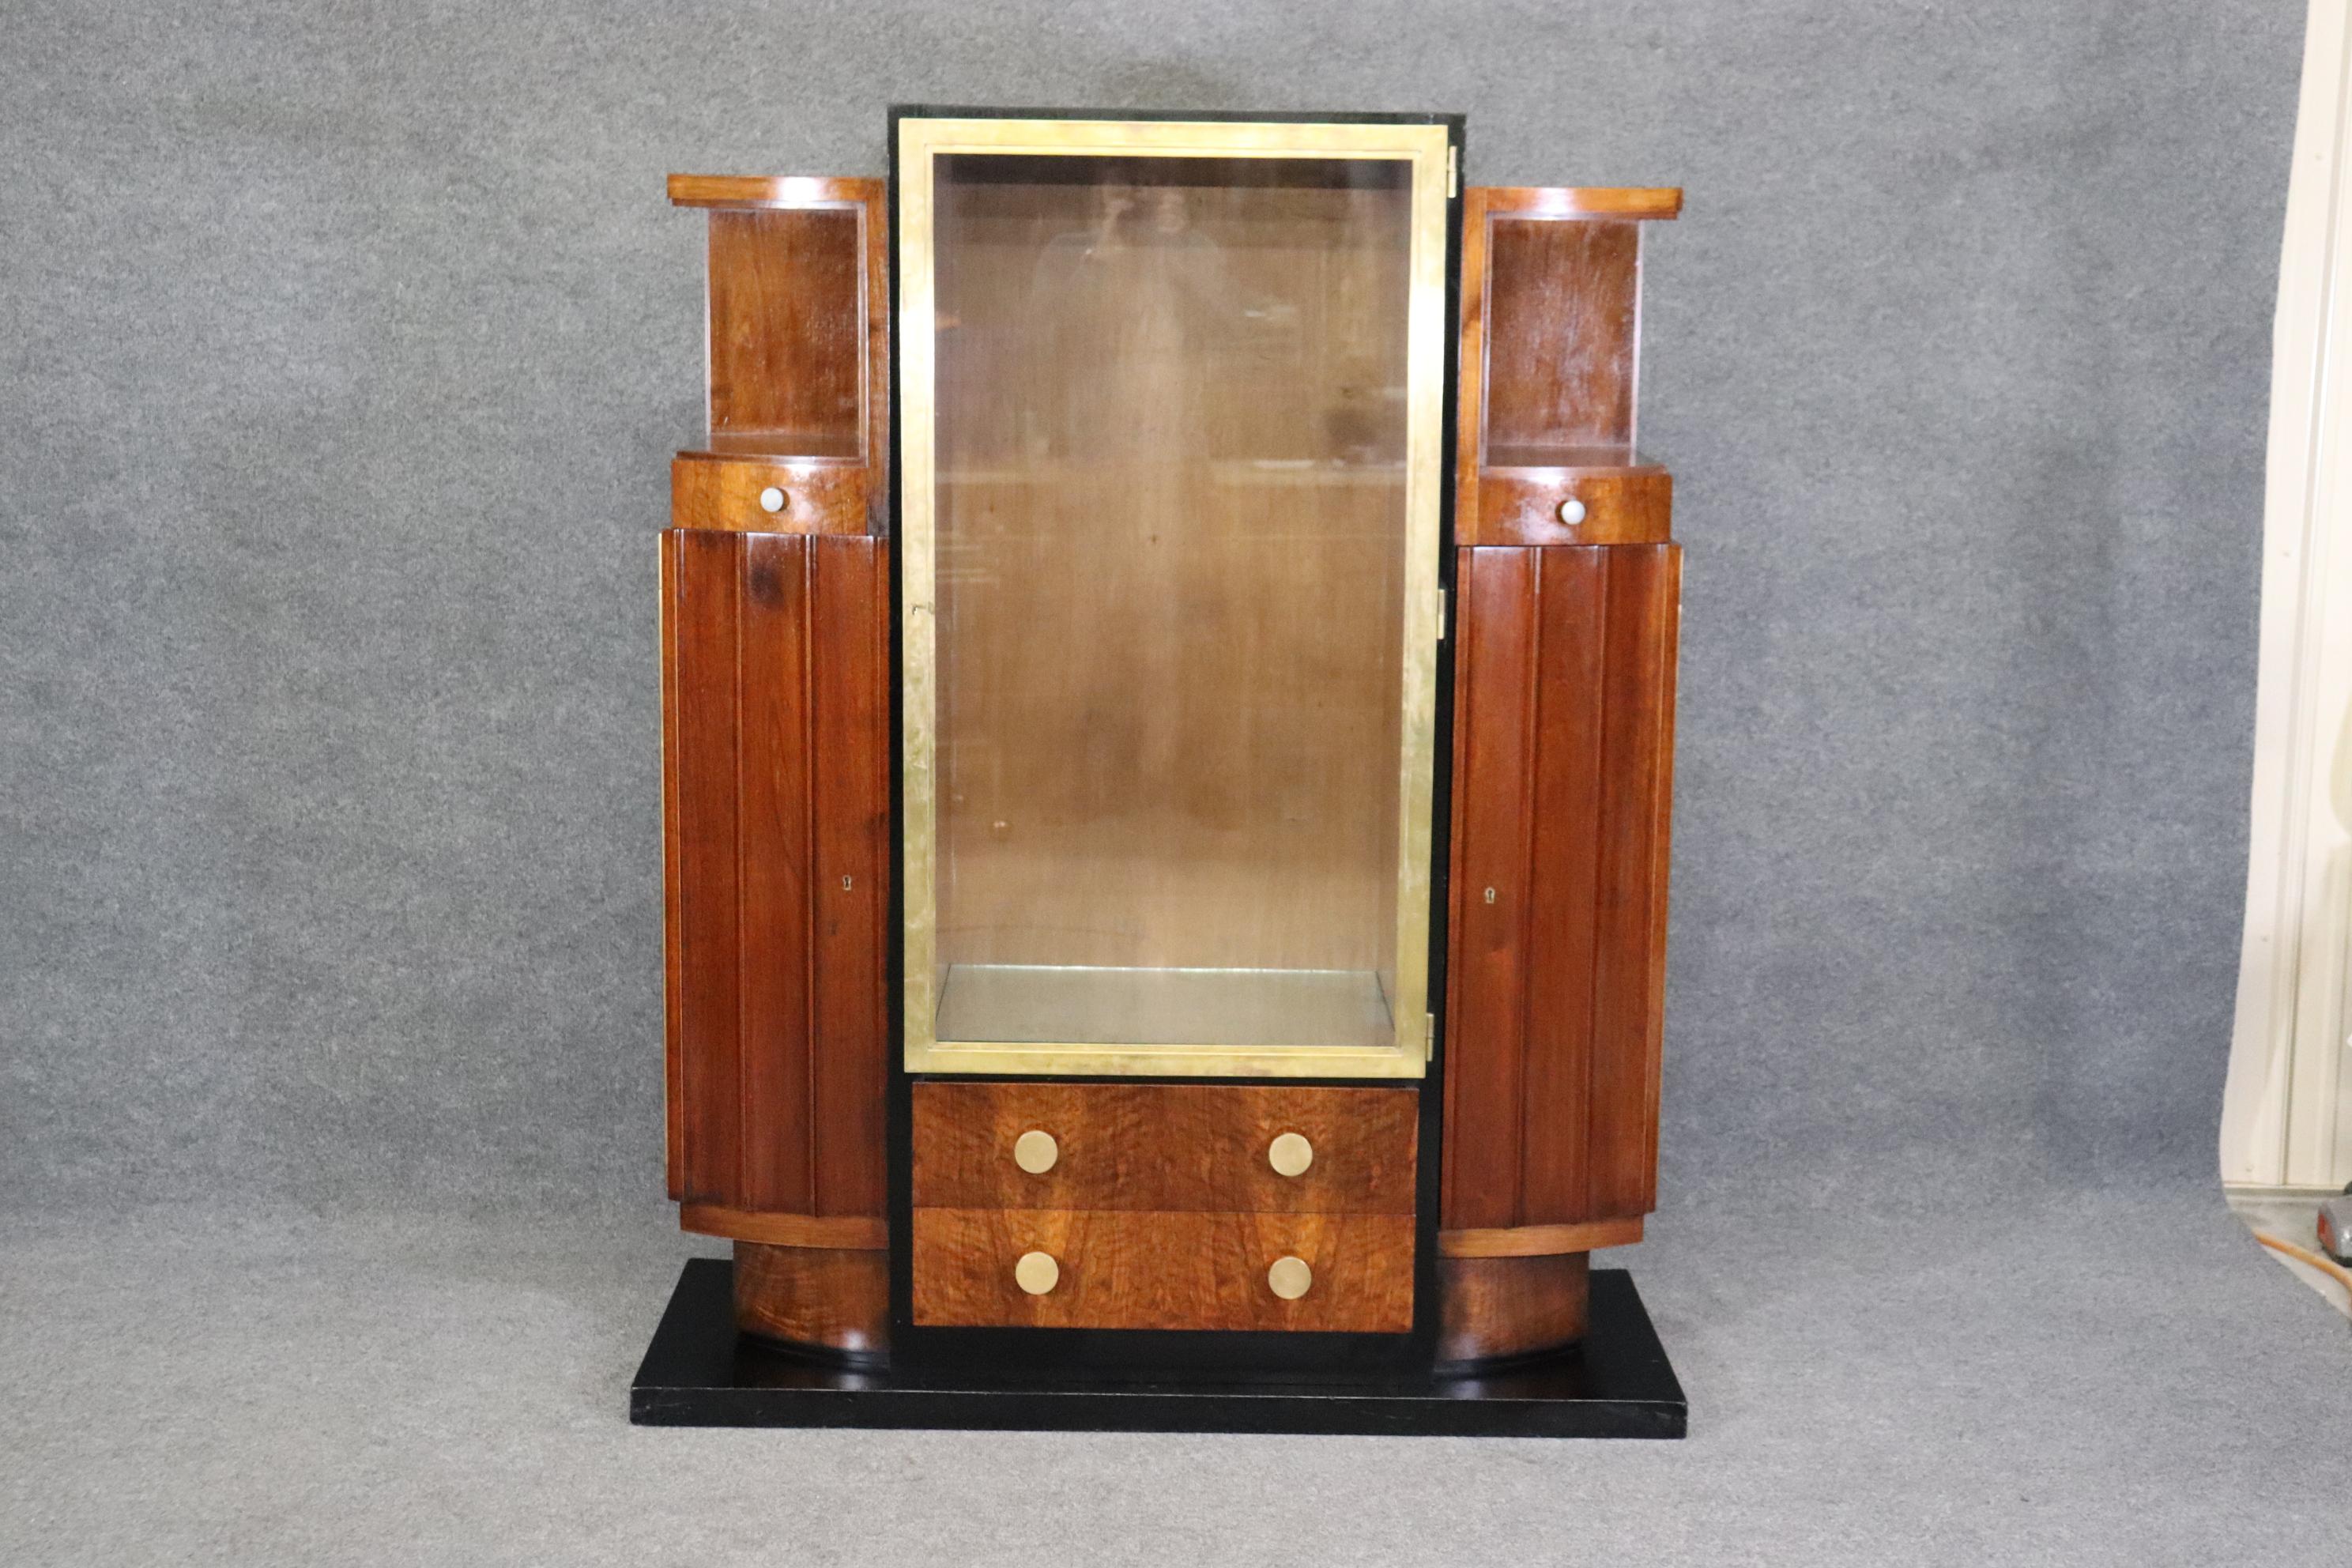 This is an absolutely breathtaking French Art deco signed china cabinet or vitrine. The signature is probably upside down and we are trying to identify it, but the design reminds me of Jules Leleu and features incredible wood quality with highly